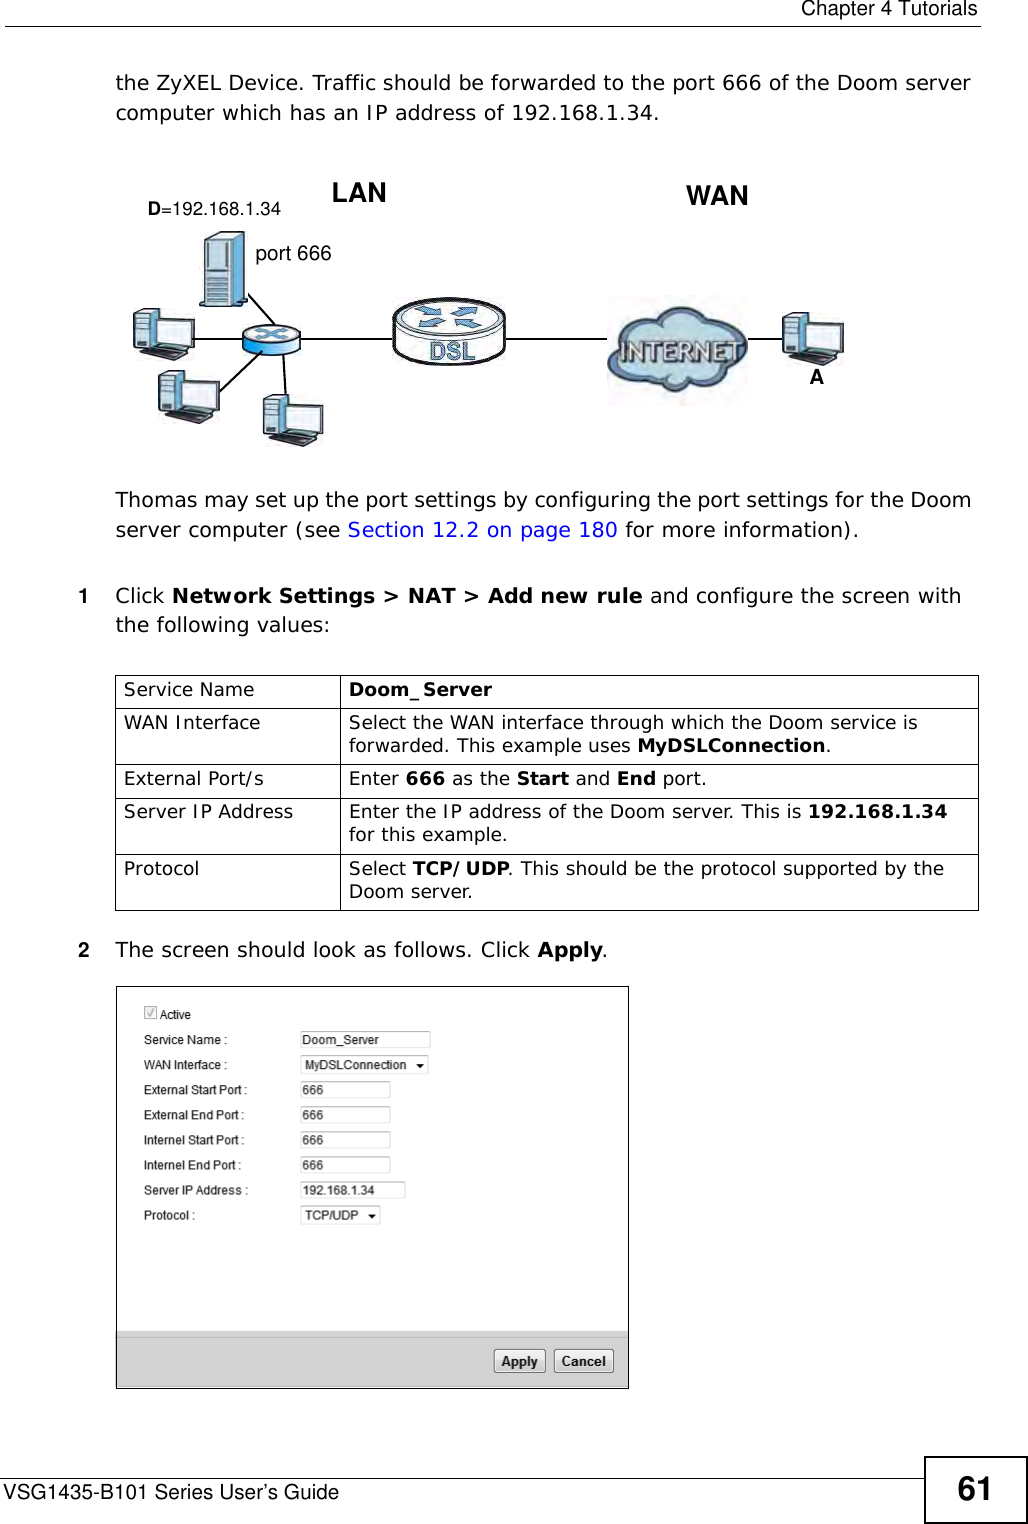  Chapter 4 TutorialsVSG1435-B101 Series User’s Guide 61the ZyXEL Device. Traffic should be forwarded to the port 666 of the Doom server computer which has an IP address of 192.168.1.34.Tutorial: NAT Port Forwarding Setup Thomas may set up the port settings by configuring the port settings for the Doom server computer (see Section 12.2 on page 180 for more information).1Click Network Settings &gt; NAT &gt; Add new rule and configure the screen with the following values:2The screen should look as follows. Click Apply.D=192.168.1.34 WANLANport 666AService Name Doom_Server WAN Interface Select the WAN interface through which the Doom service is forwarded. This example uses MyDSLConnection.External Port/s Enter 666 as the Start and End port.Server IP Address Enter the IP address of the Doom server. This is 192.168.1.34 for this example.Protocol Select TCP/UDP. This should be the protocol supported by the Doom server.